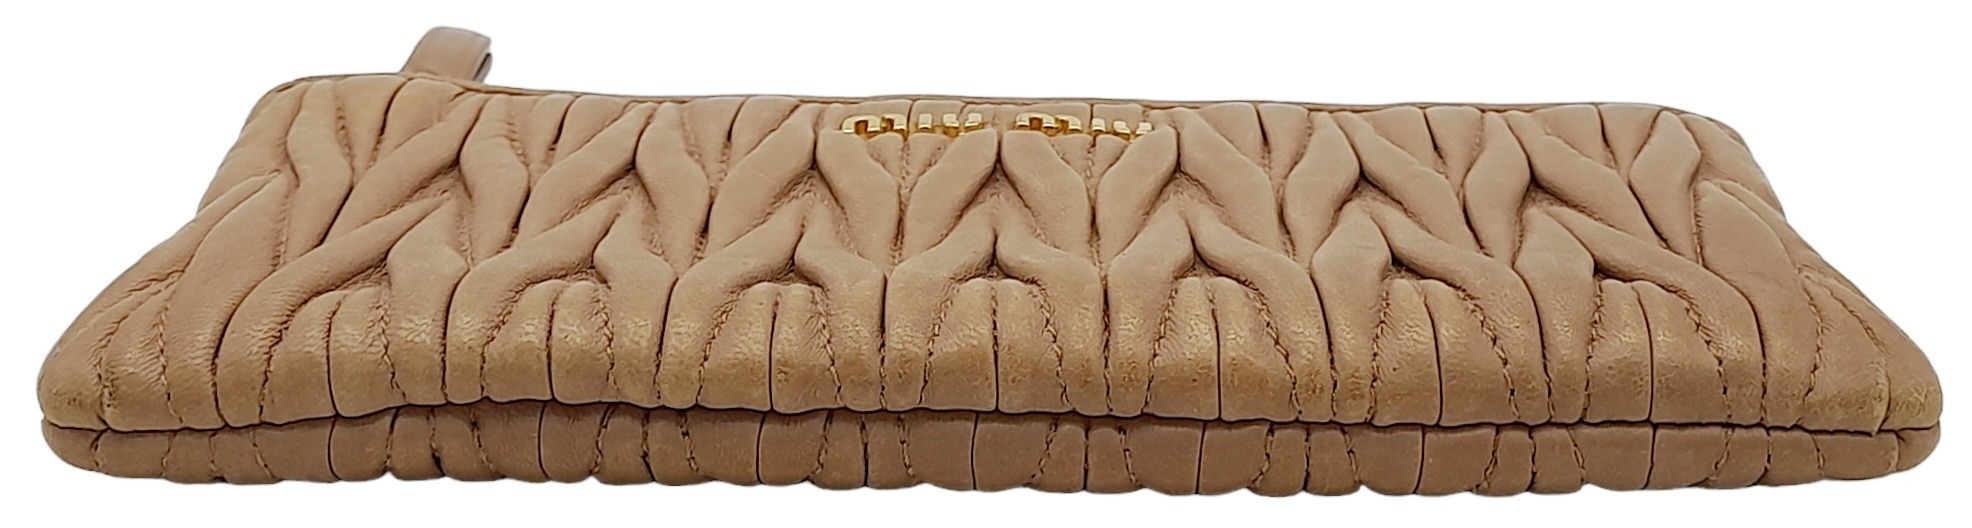 A Miu Miu Dust Pink Purse. Matelassé leather exterior with gold-toned hardware and zipped top - Image 3 of 10